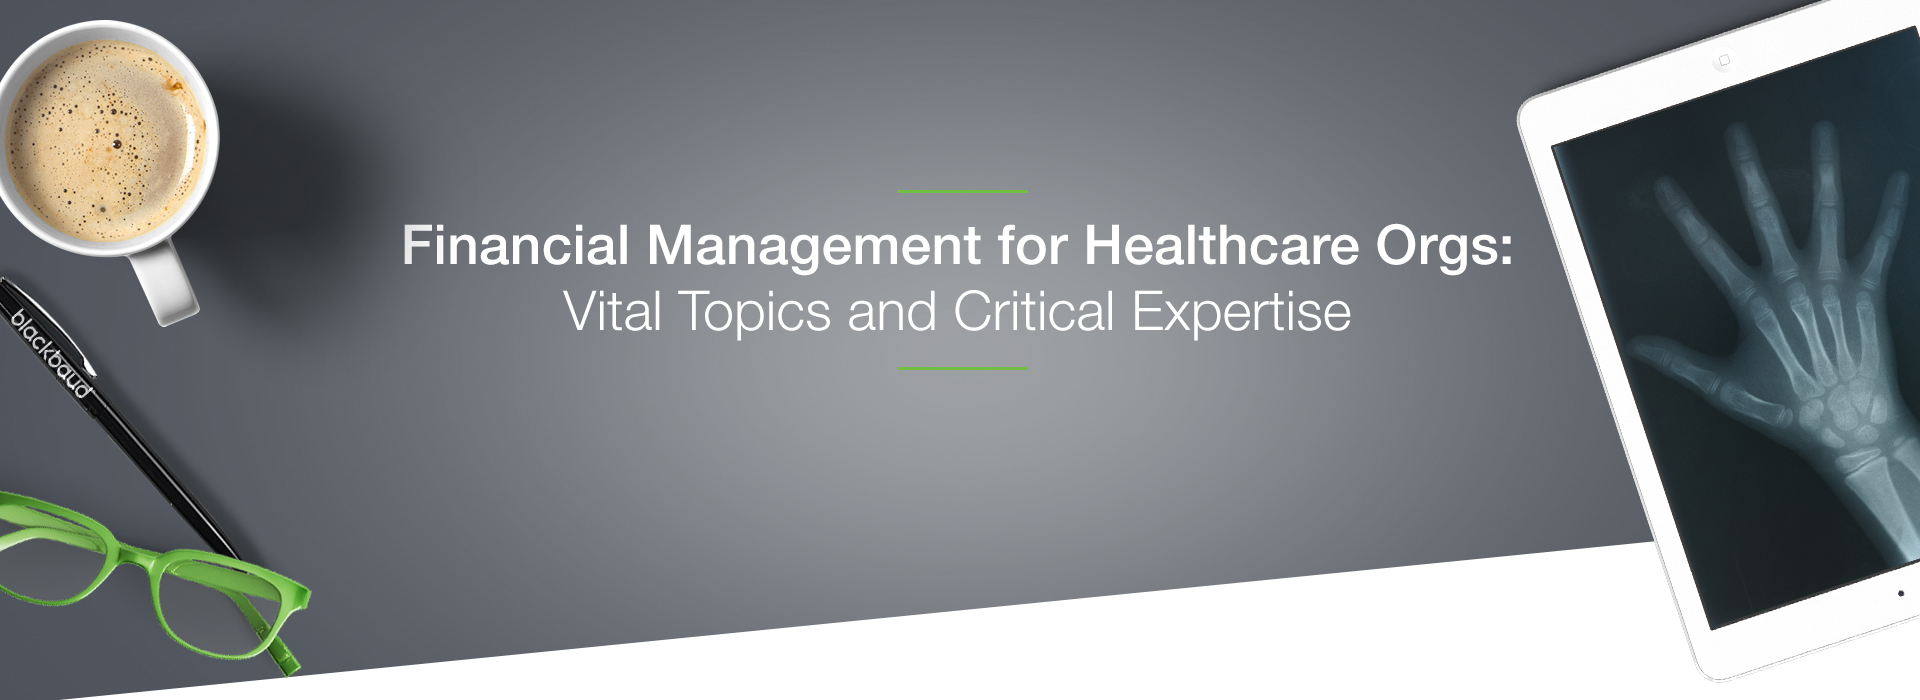 Financial Management for Healthcare Orgs: Vital Topics and Critical Expertise